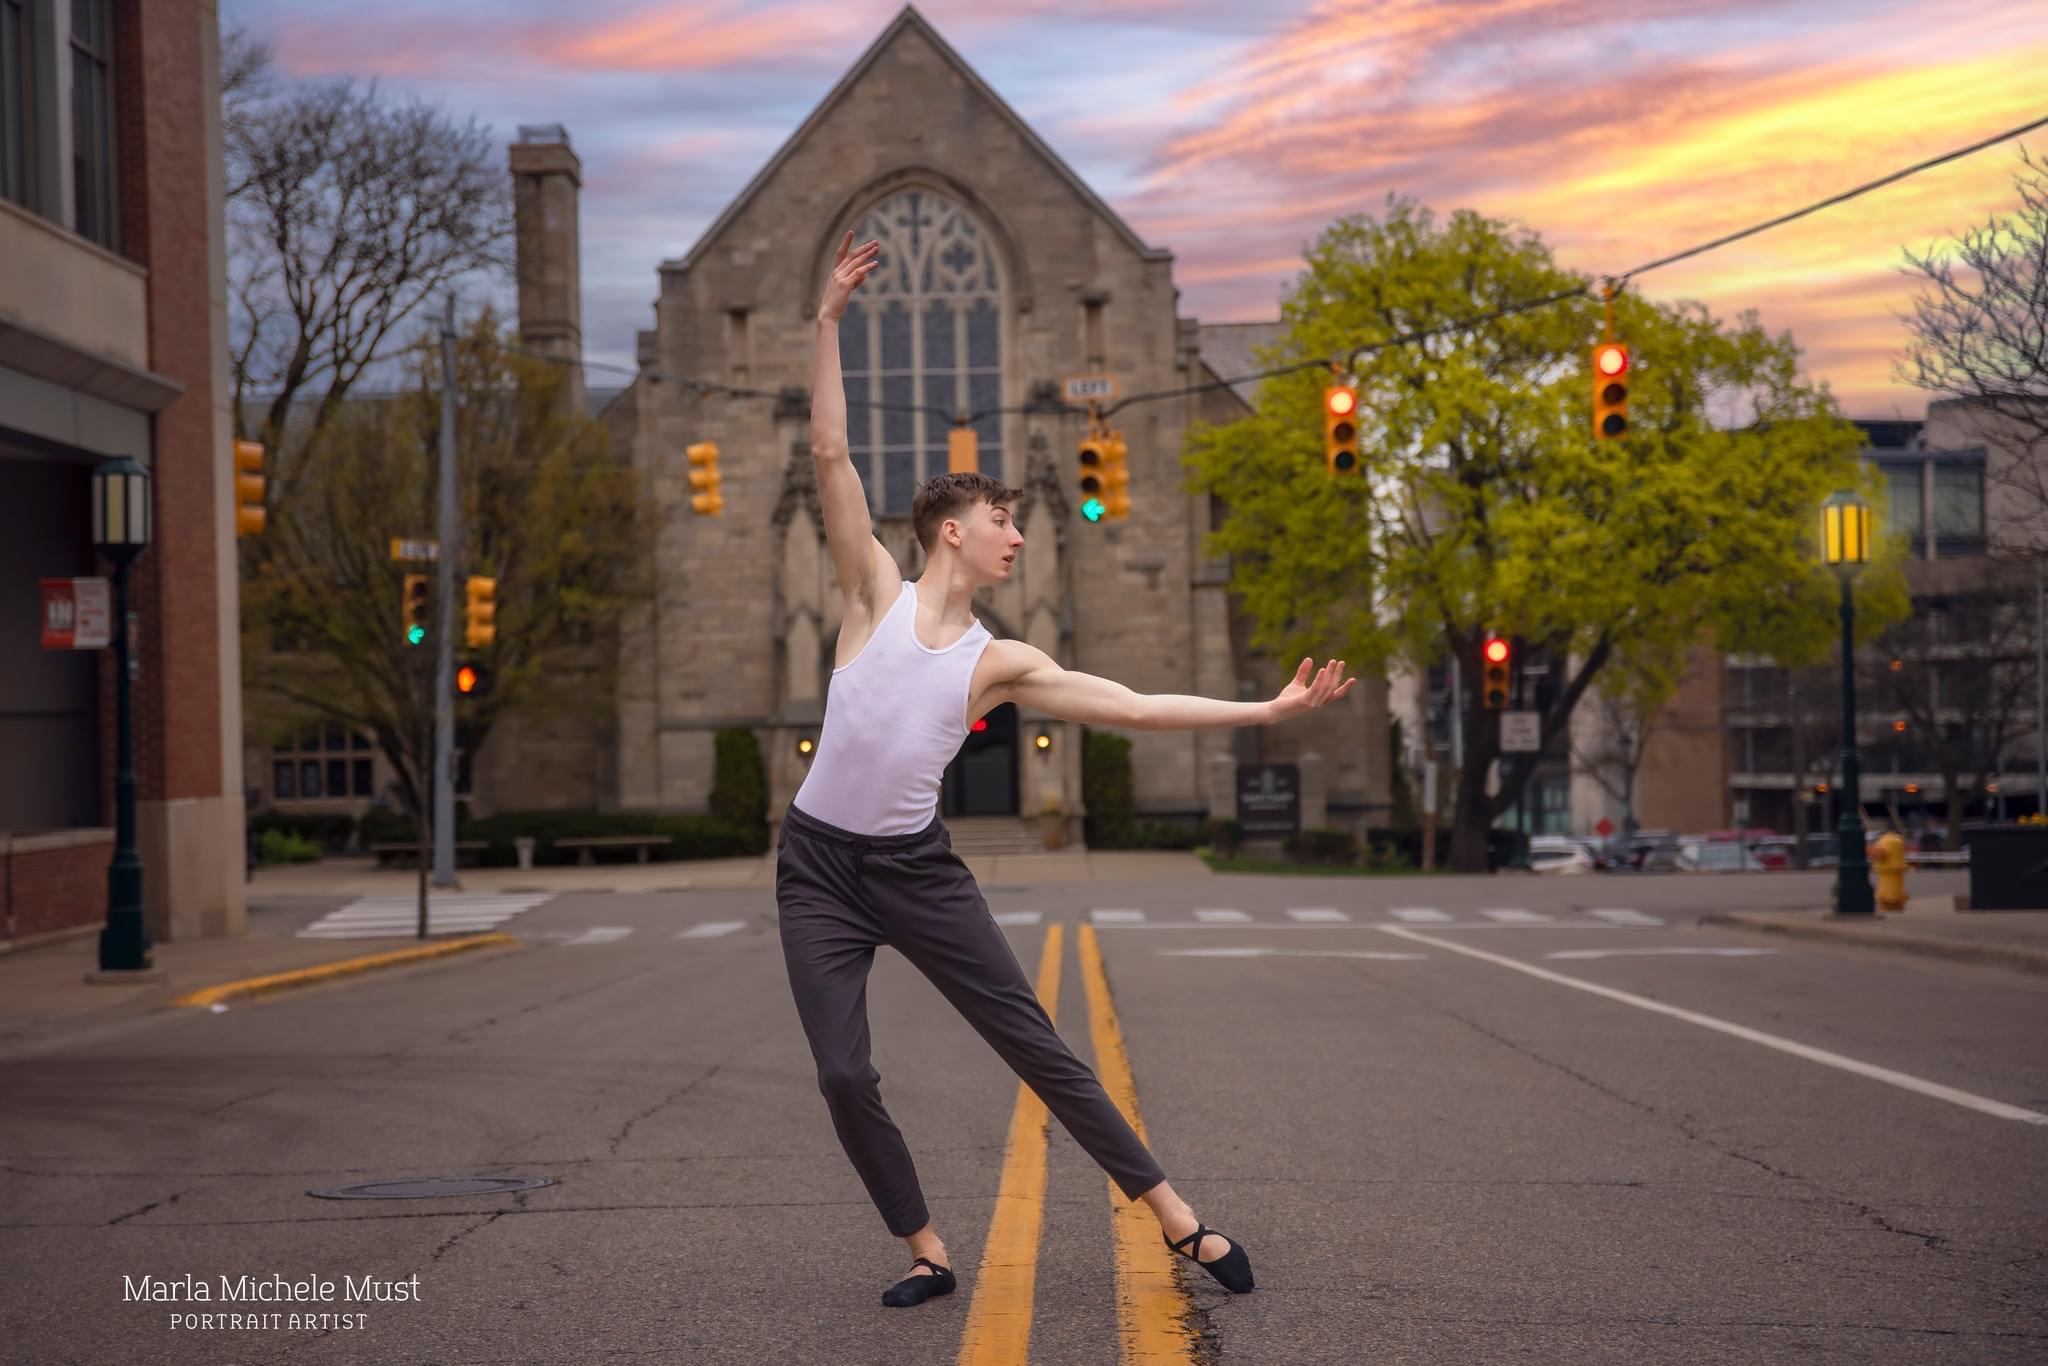 Man poes gracefully leaning to his side in the center of a city street, a brick church in the background, during a dance photoshoot, taken by a Michigan dance photographer.